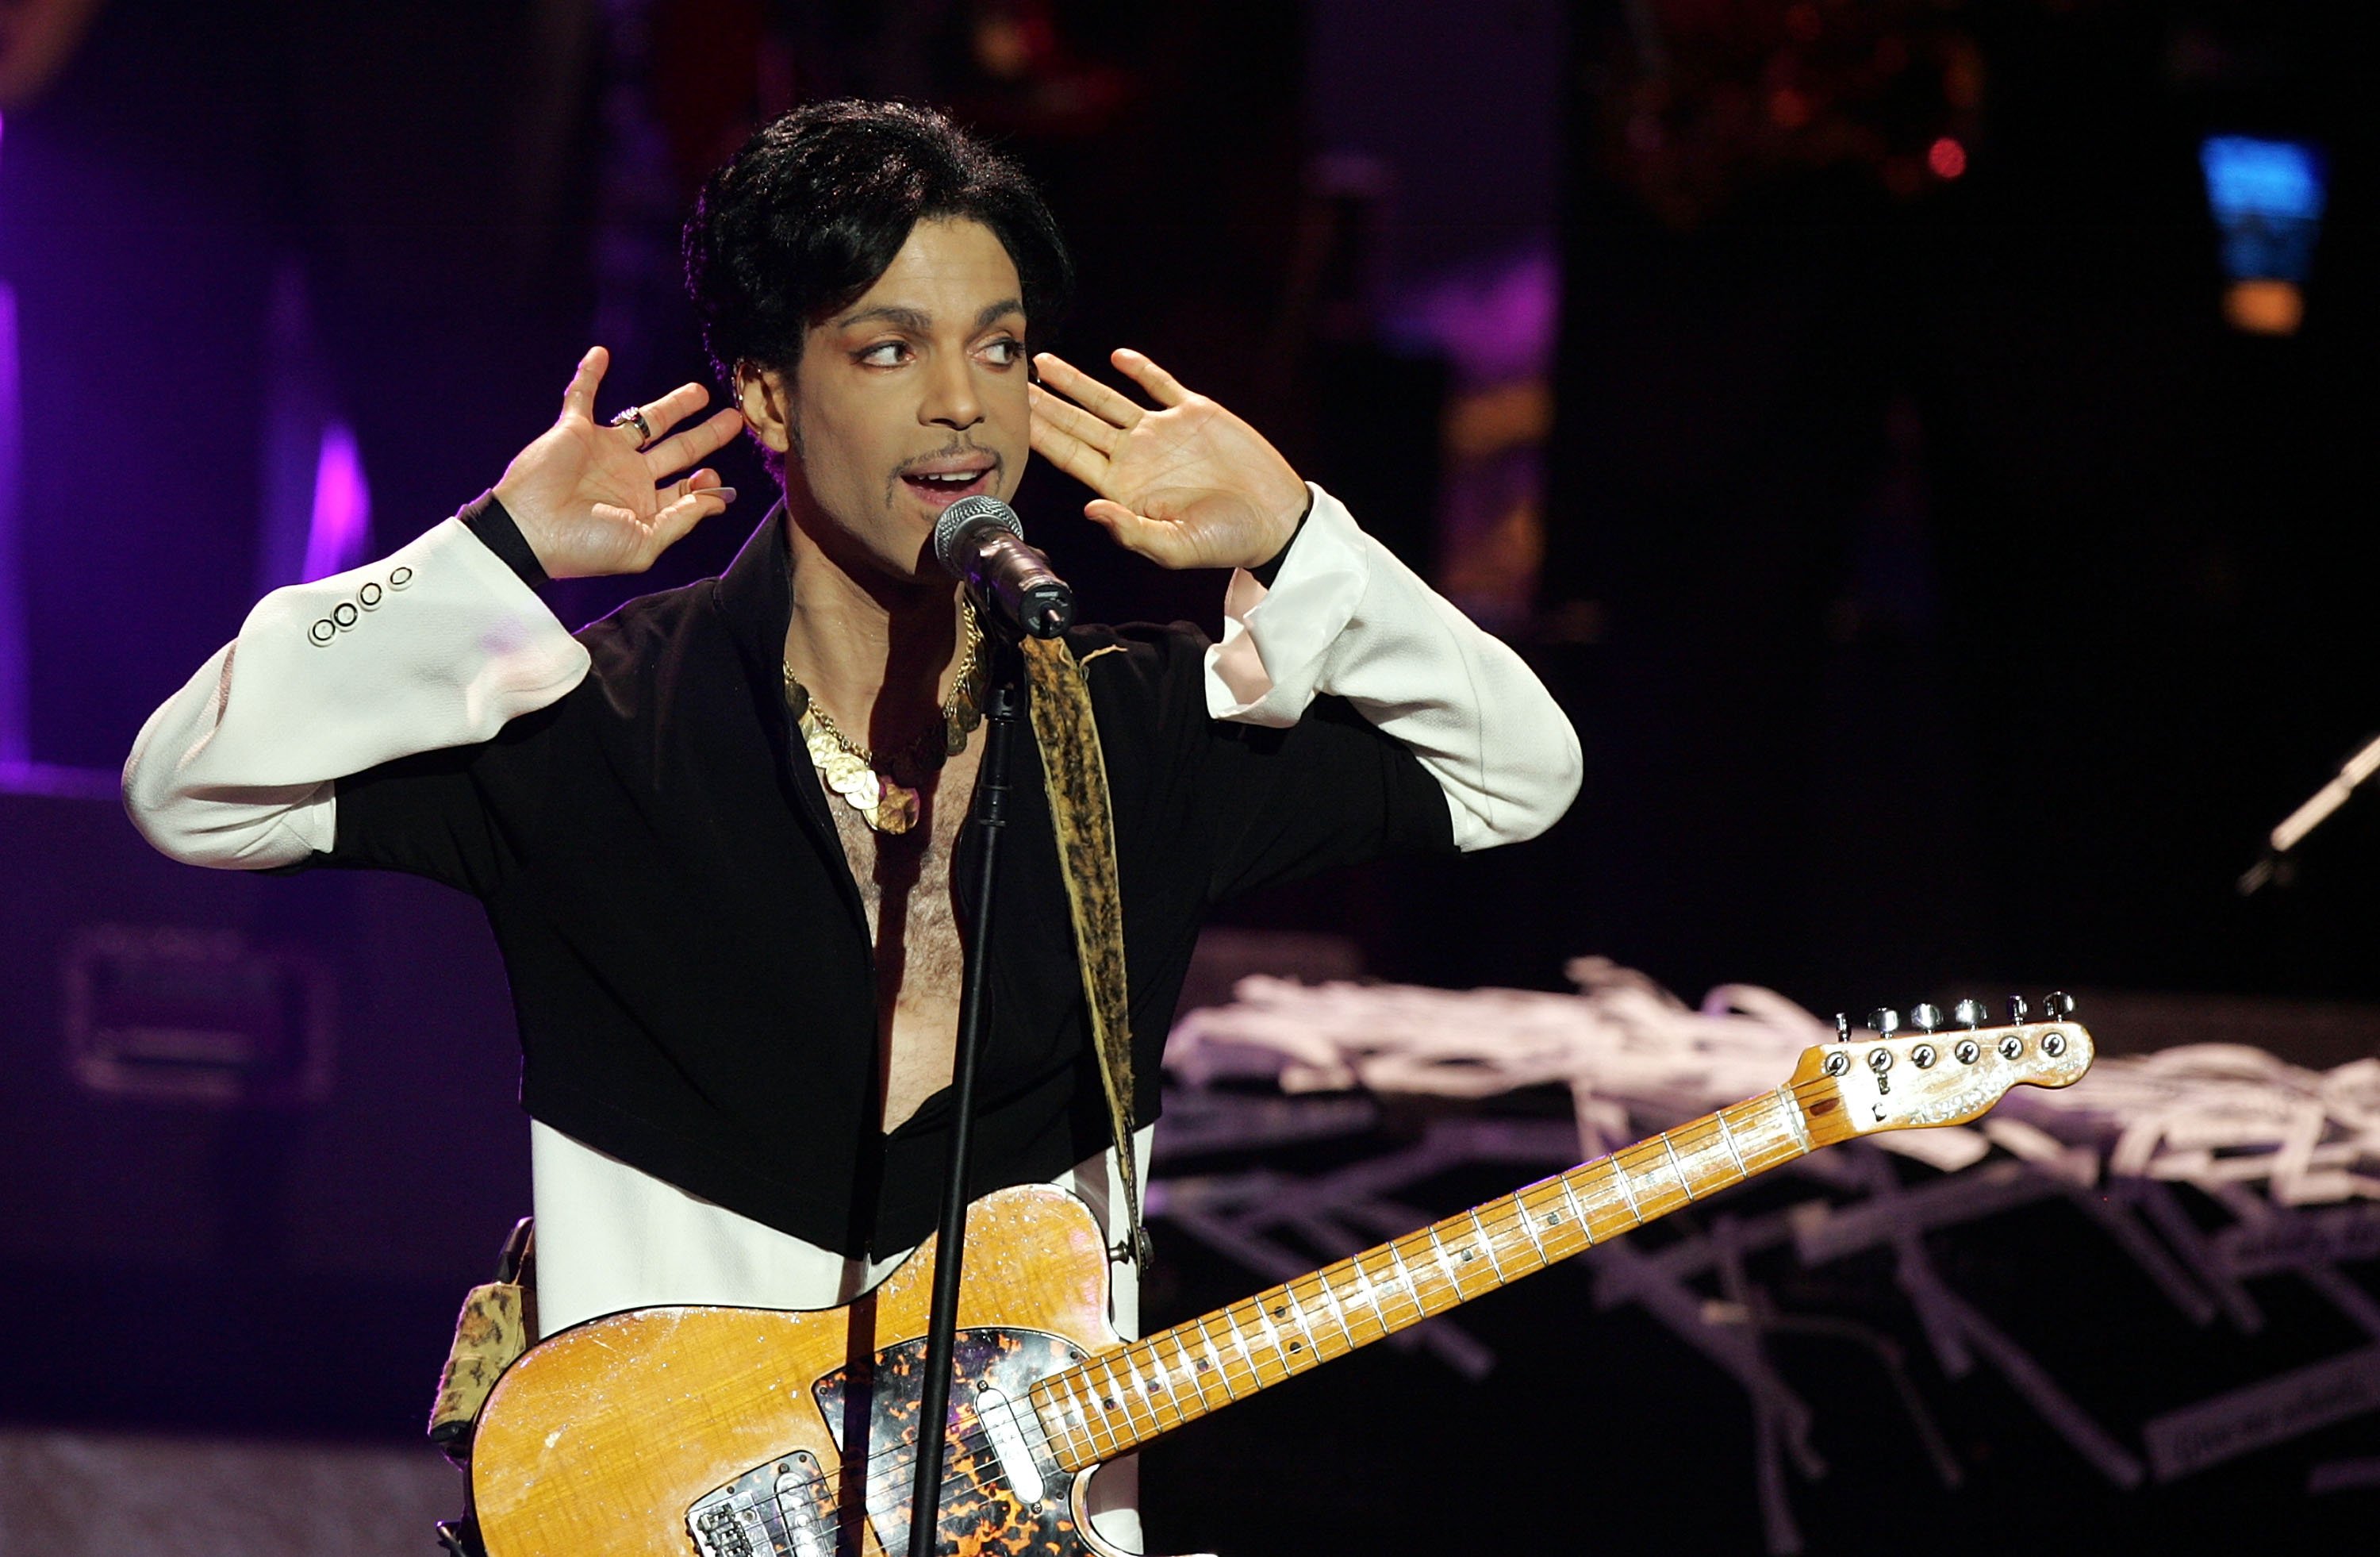 Prince with a guitar